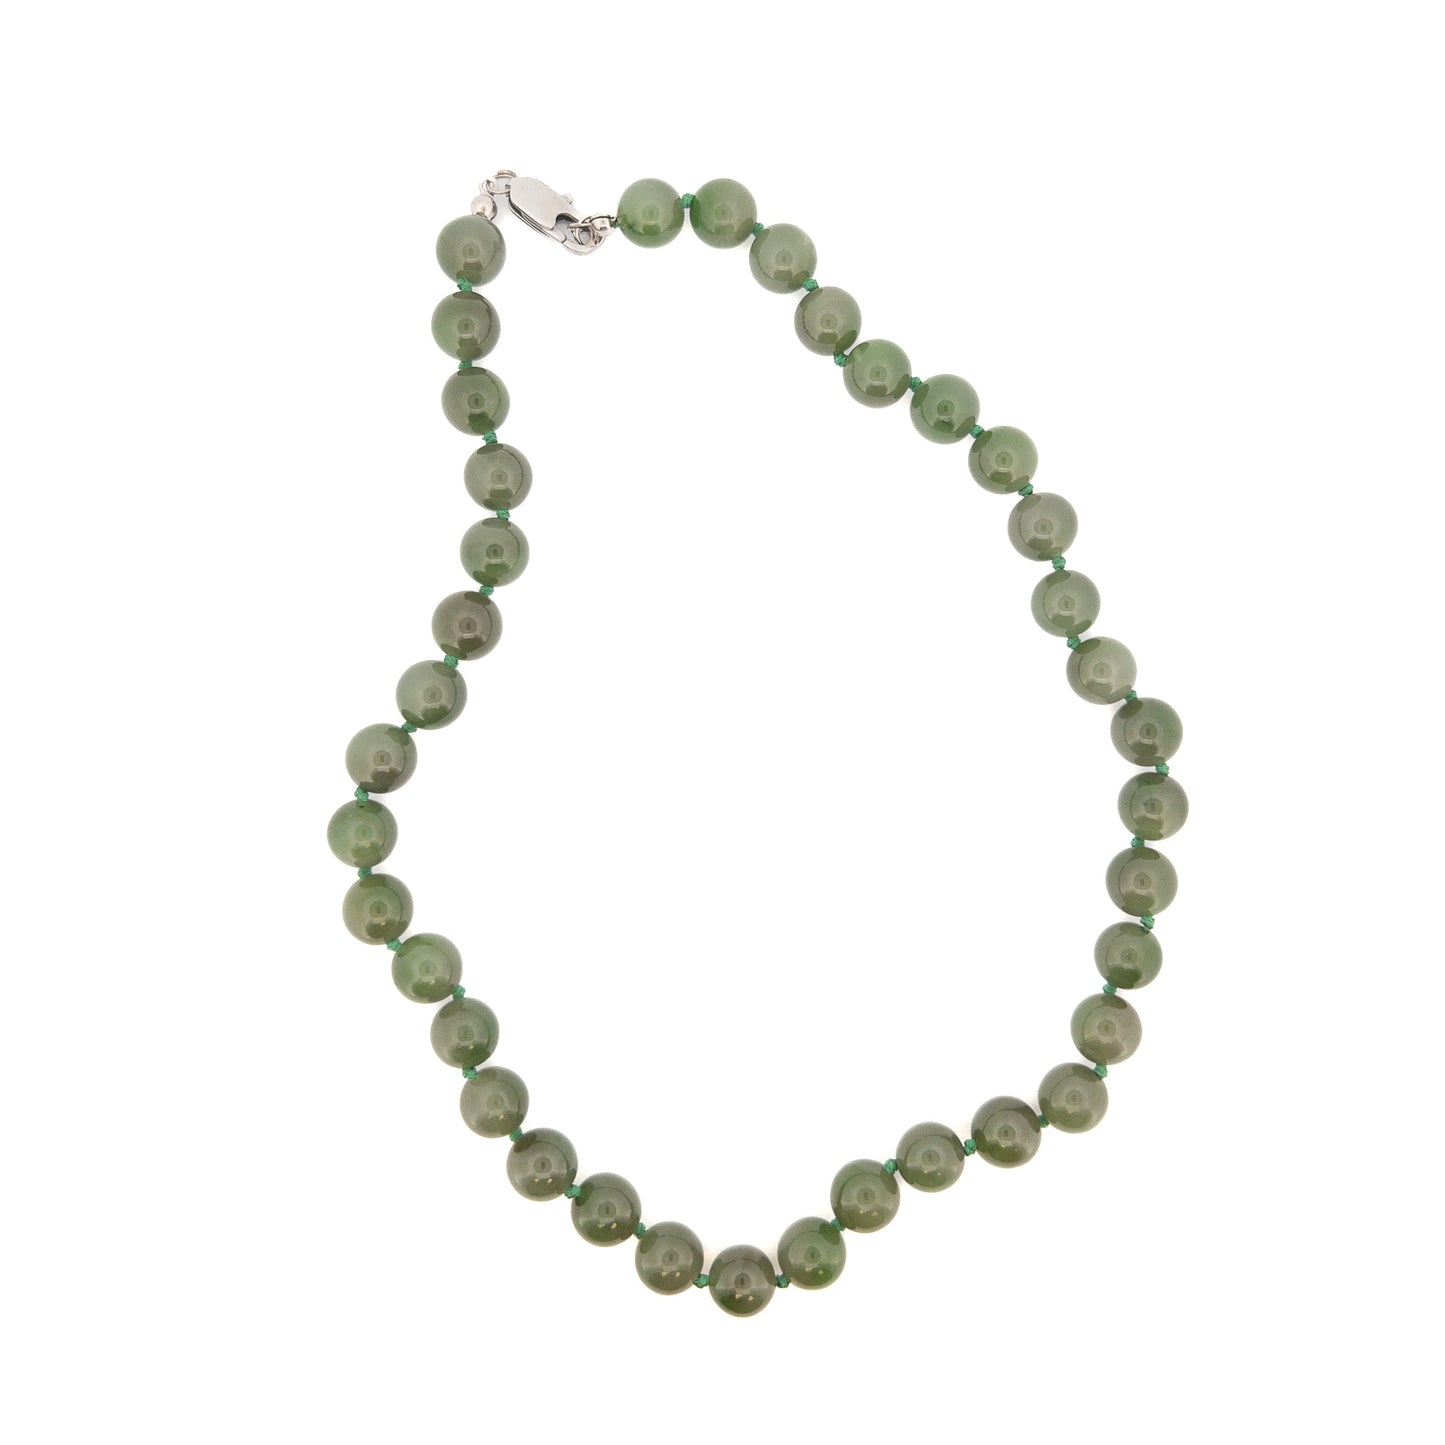 Canadian Jade 10mm Round Bead Knotted Necklace